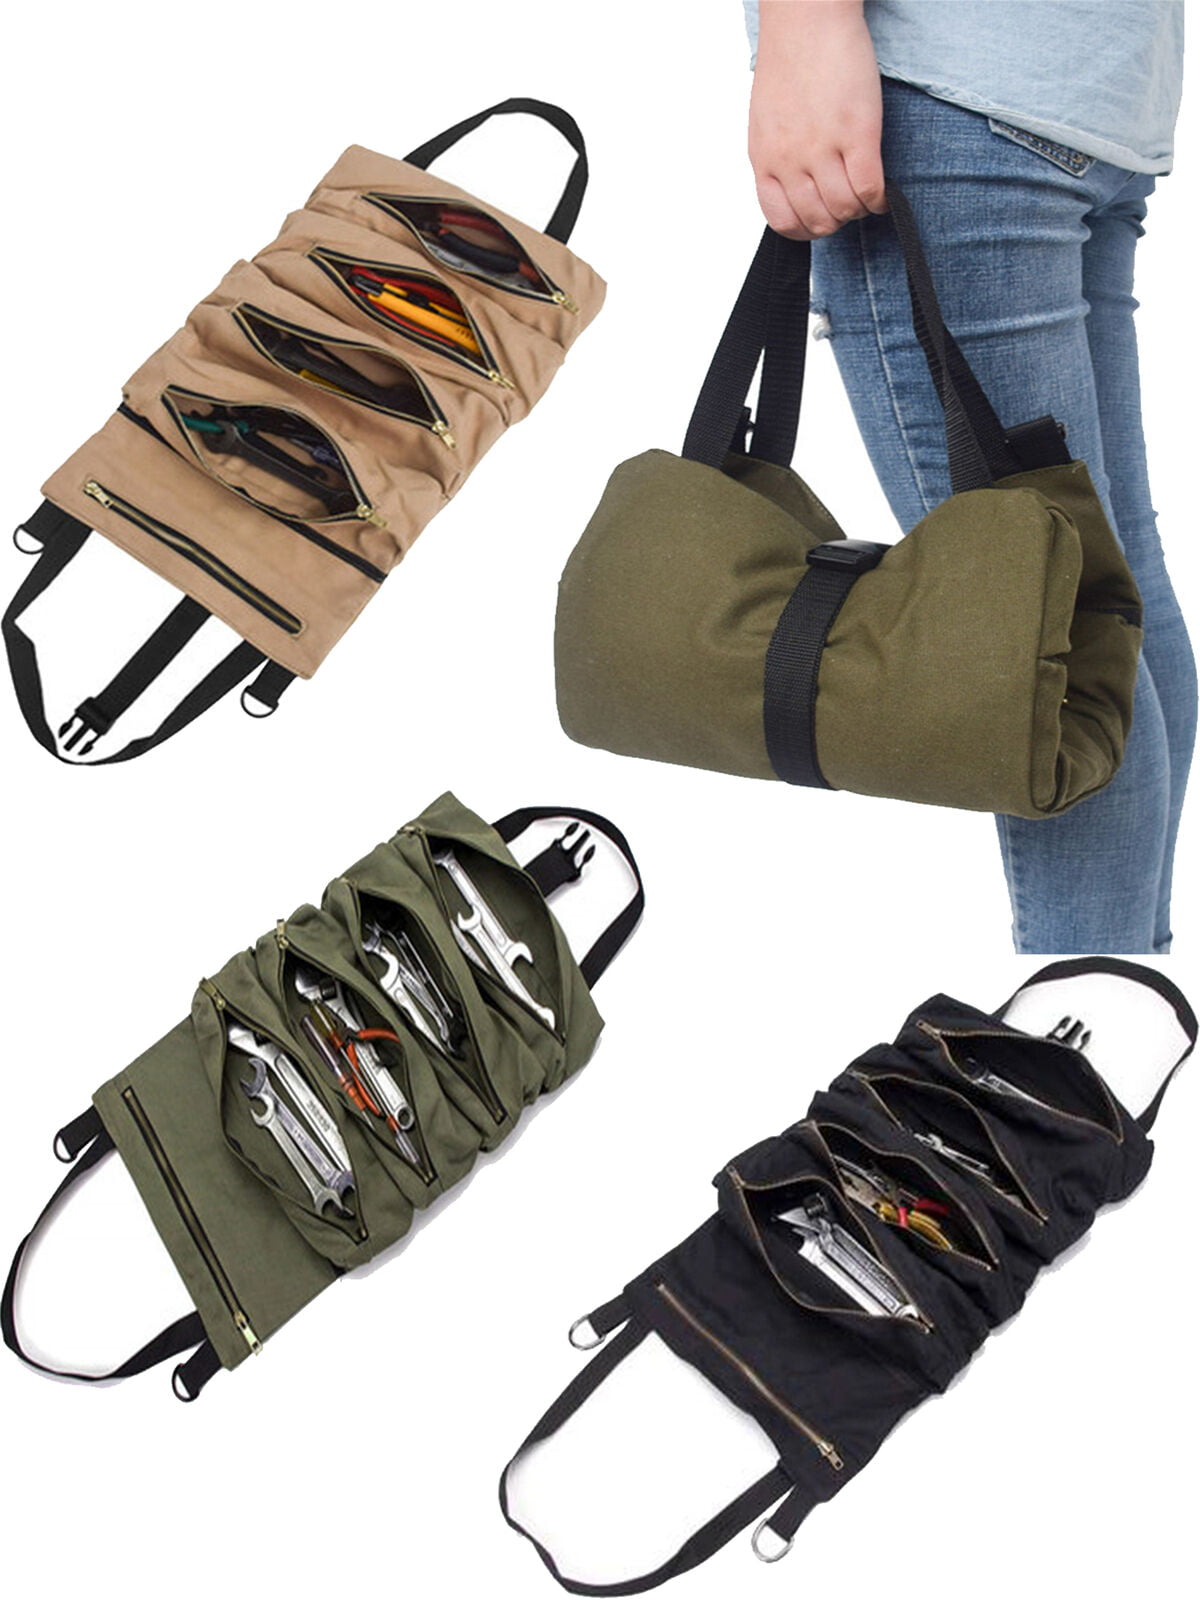 LT_ Tool Roll Up Bag Canvas Wrench Storage Pouch Carrier Car Back Seat Organiz 